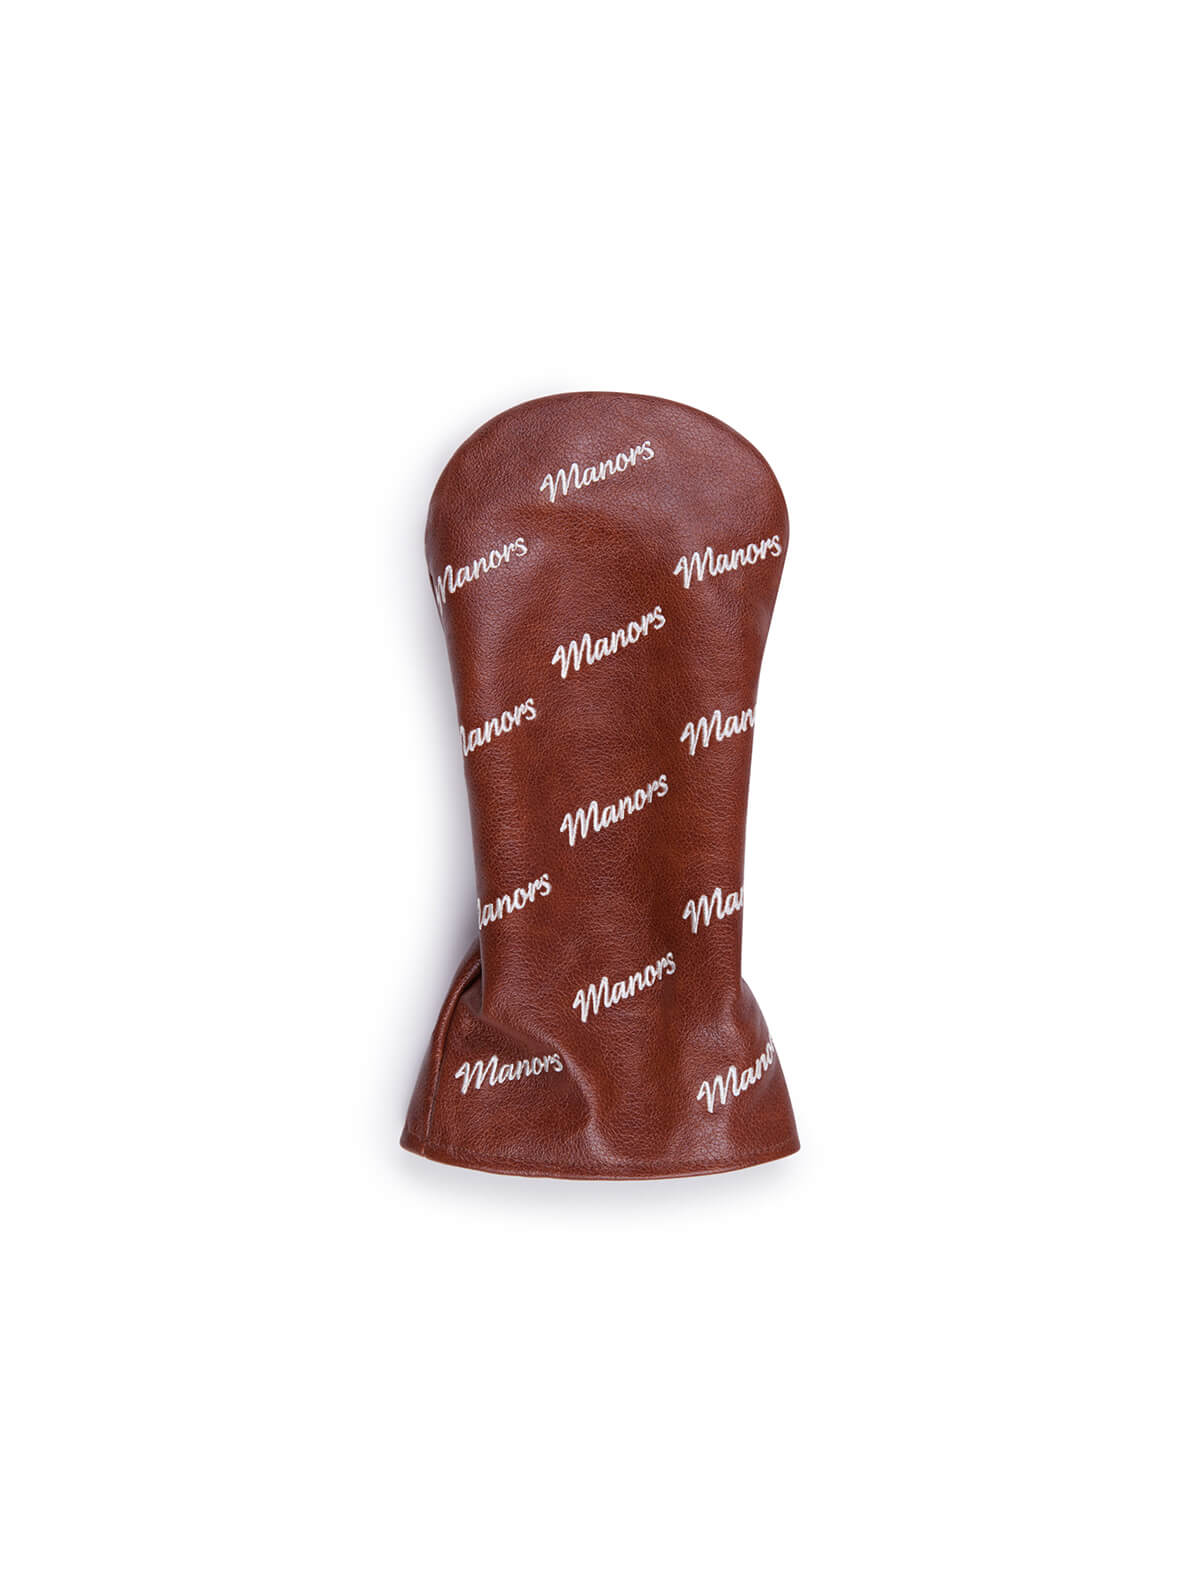 MANORS GOLF Leather Driver Cover in Brown